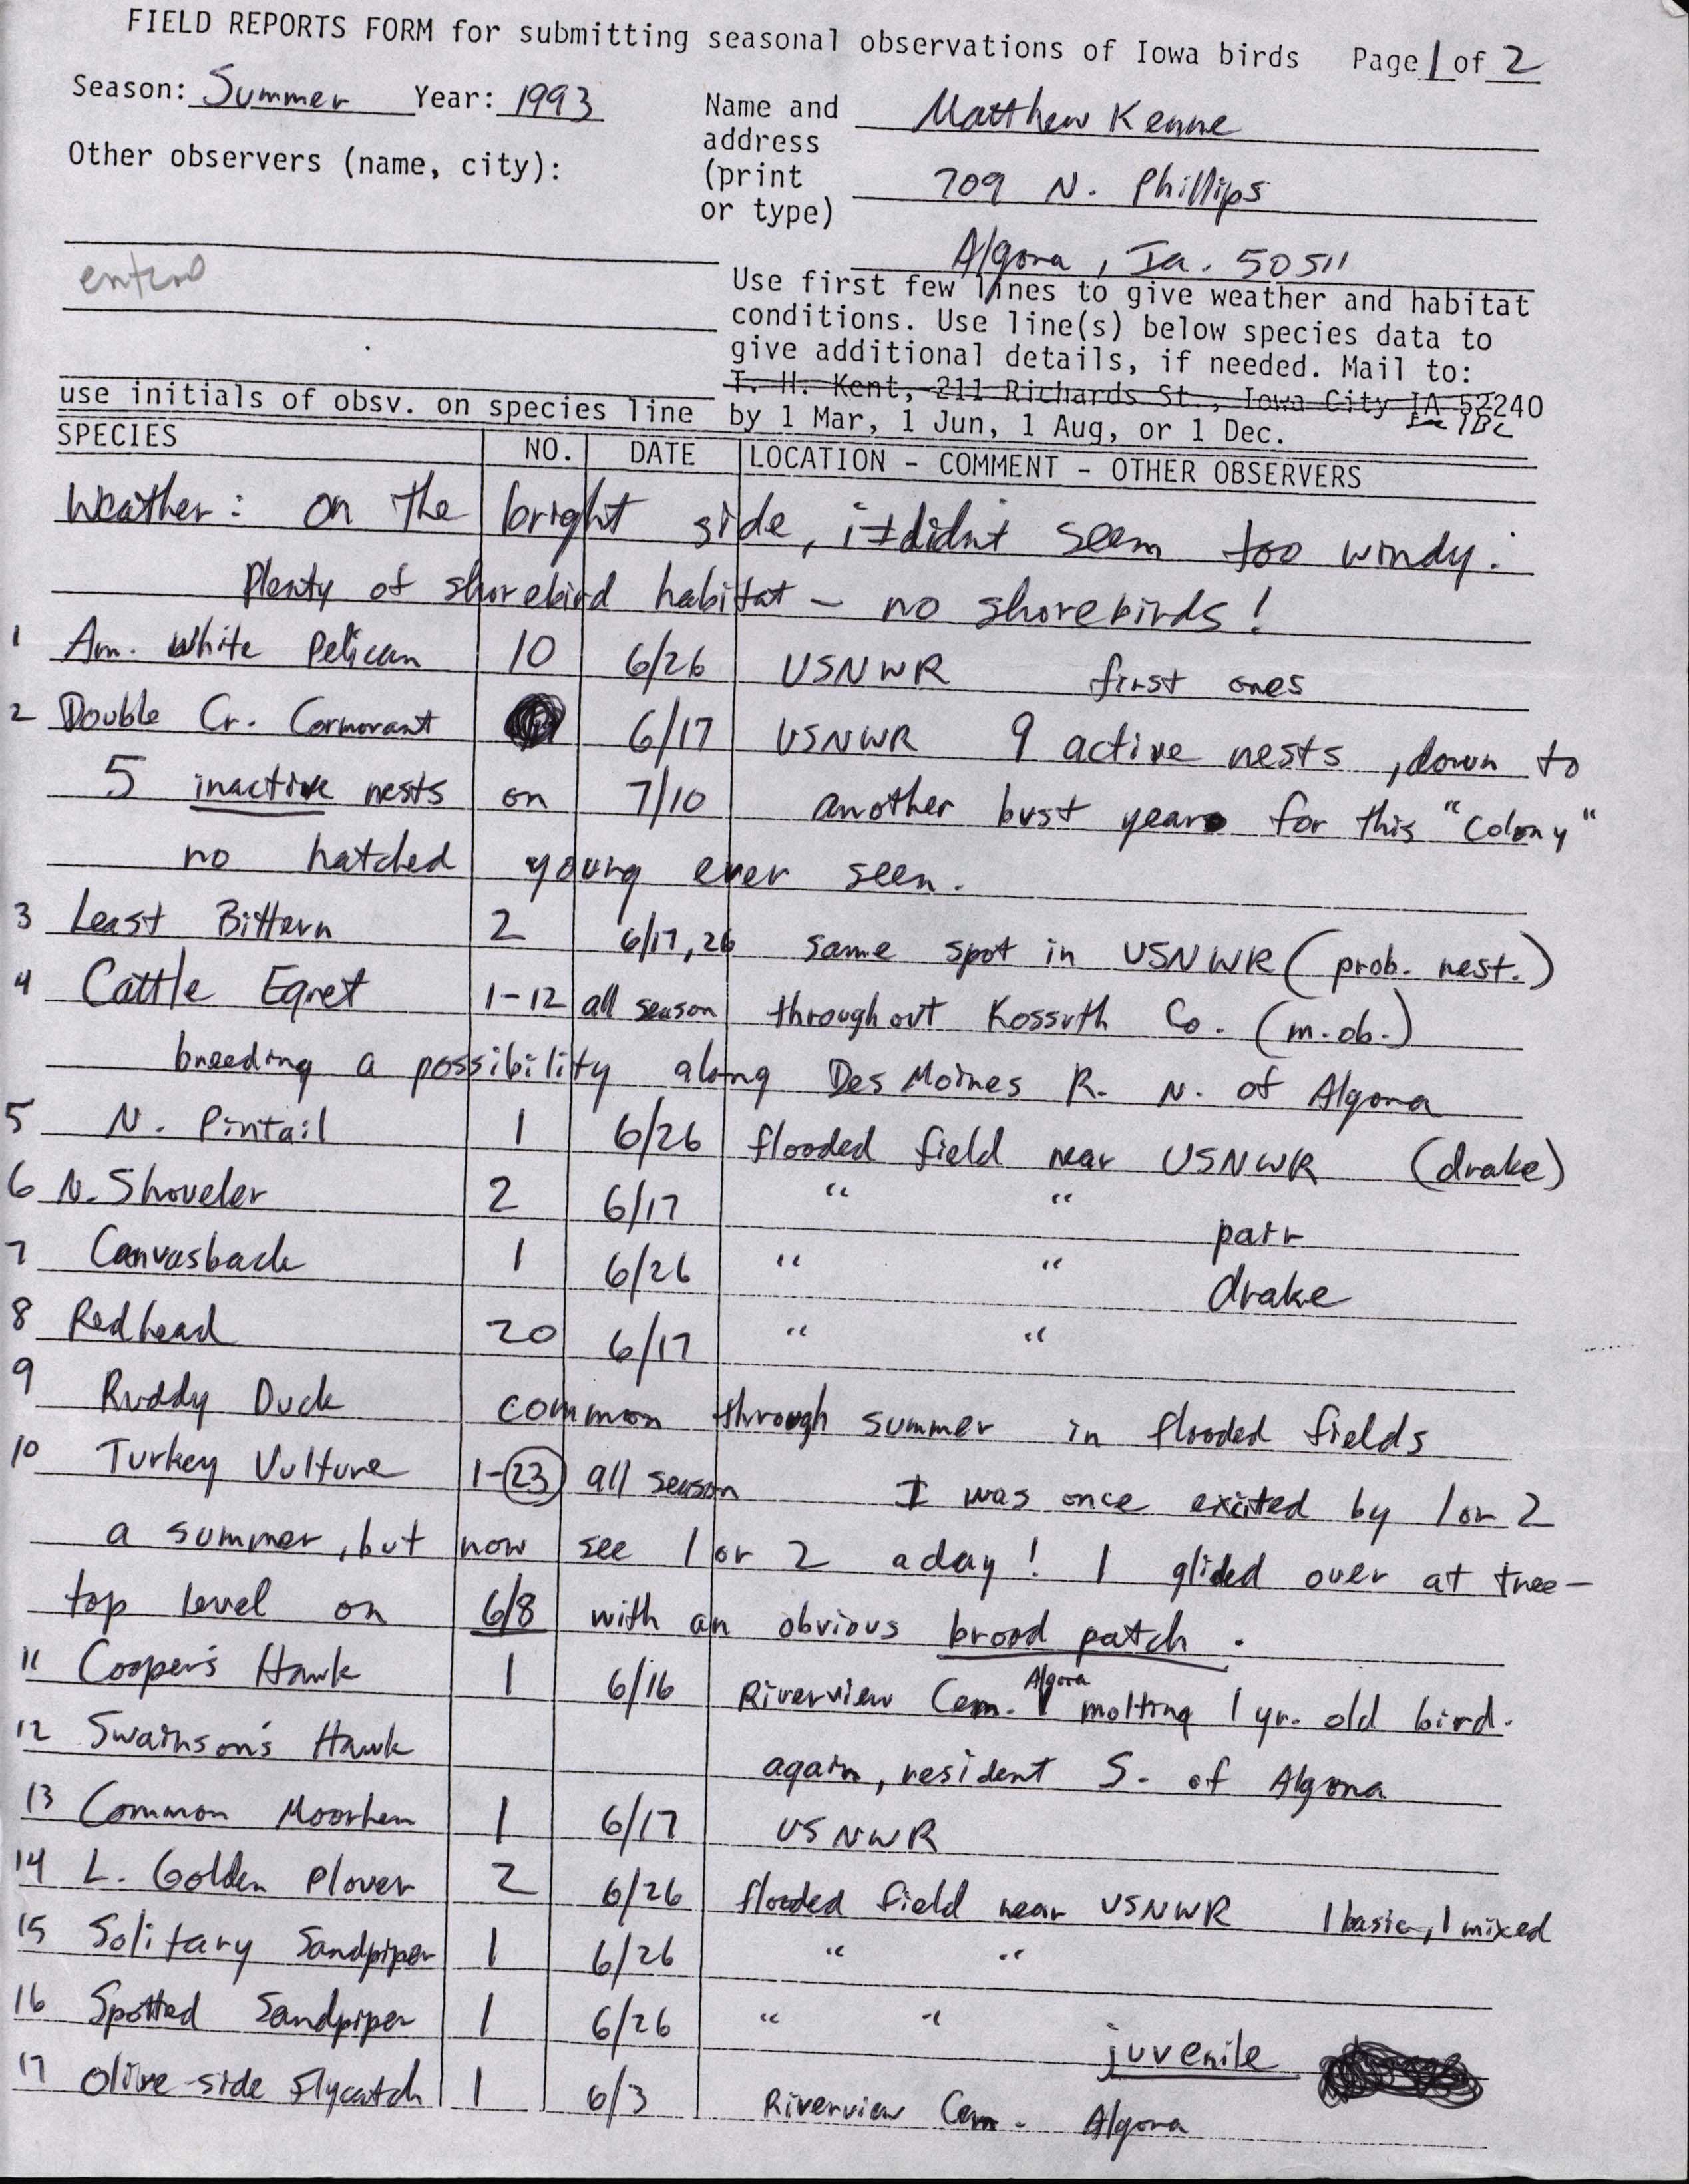 Field reports form for submitting seasonal observations of Iowa birds, Matthew Kenne, summer 1993